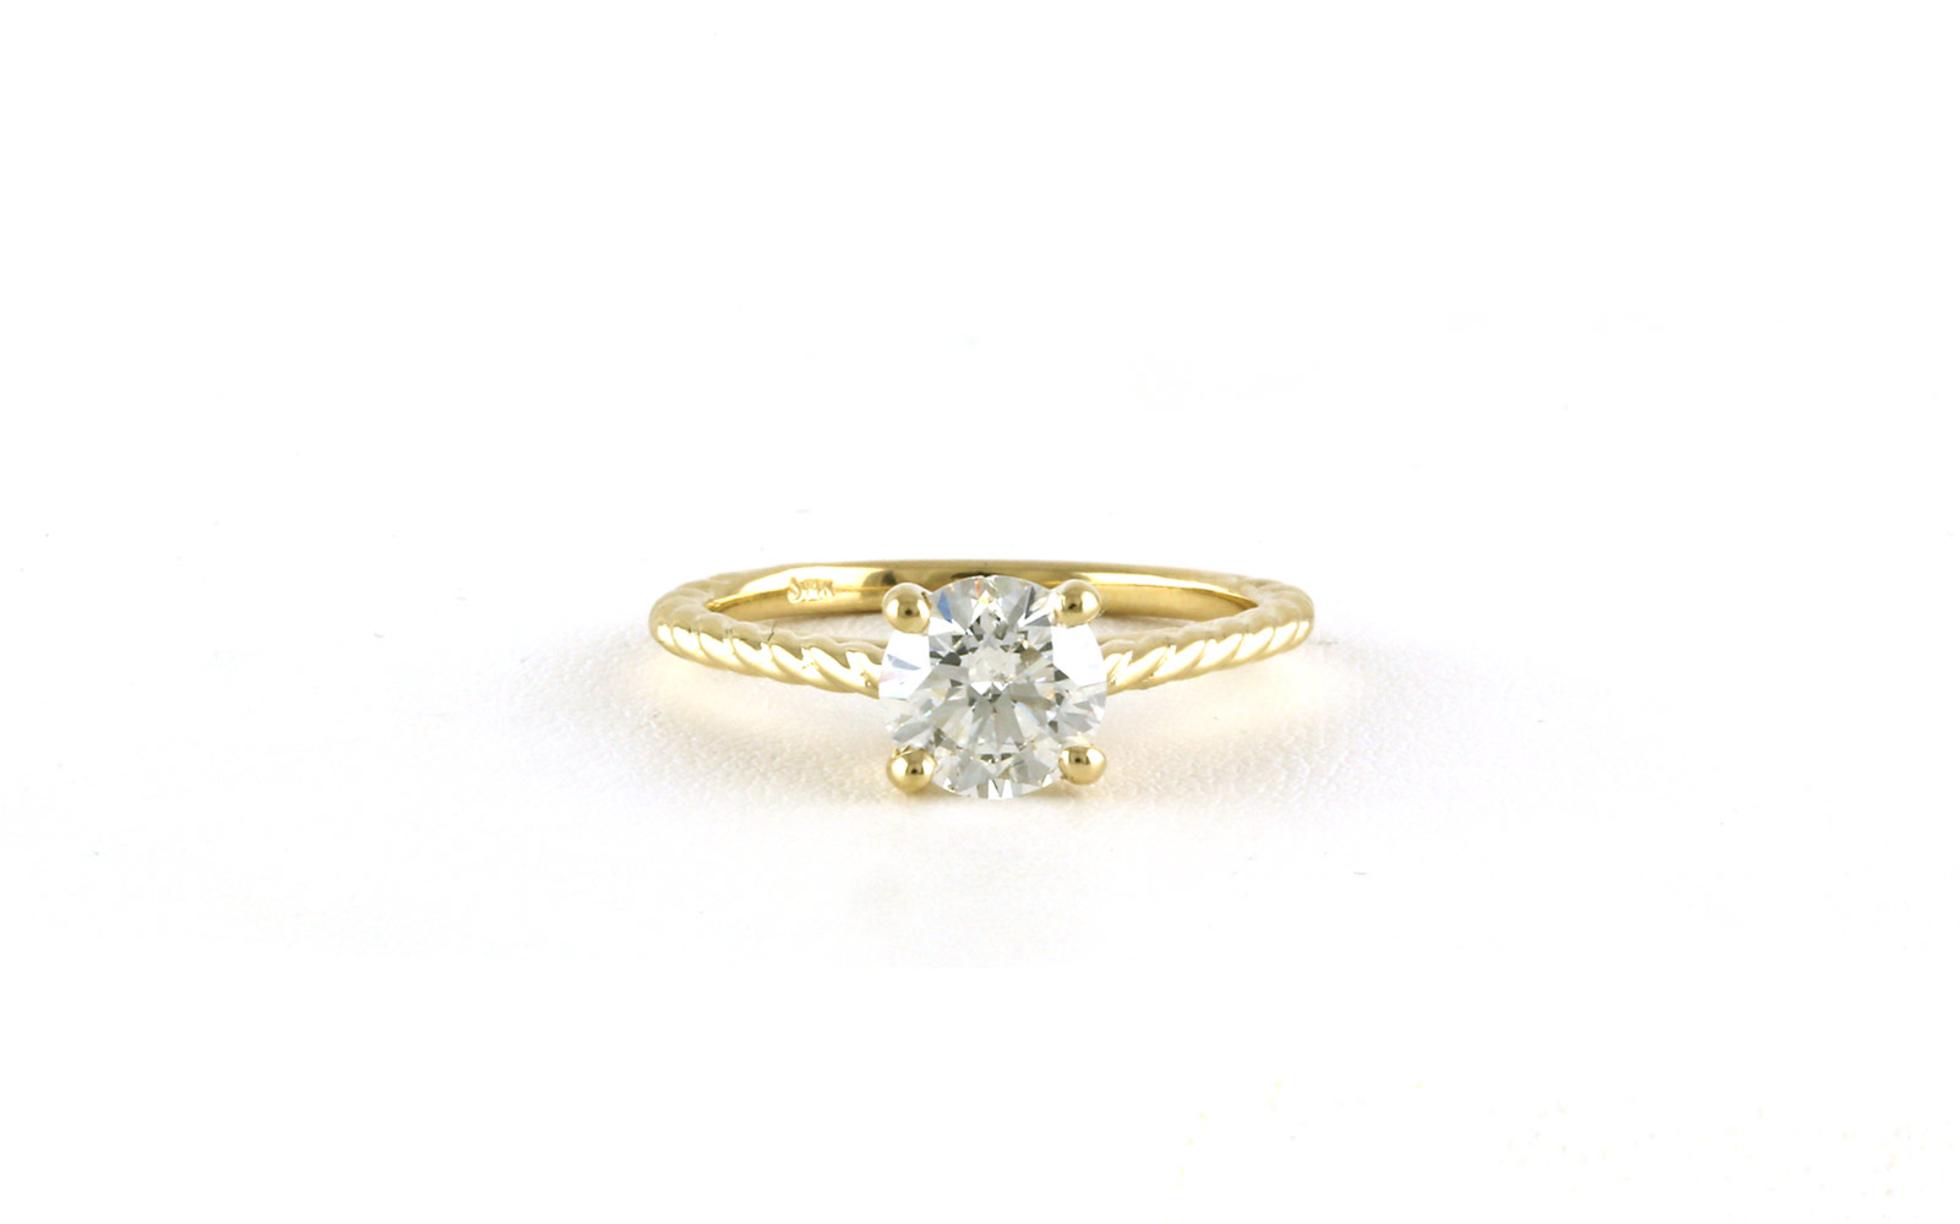 4-Prong Solitaire Diamond Engagement Ring with Rope Detail in Yellow Gold (1.19cts)